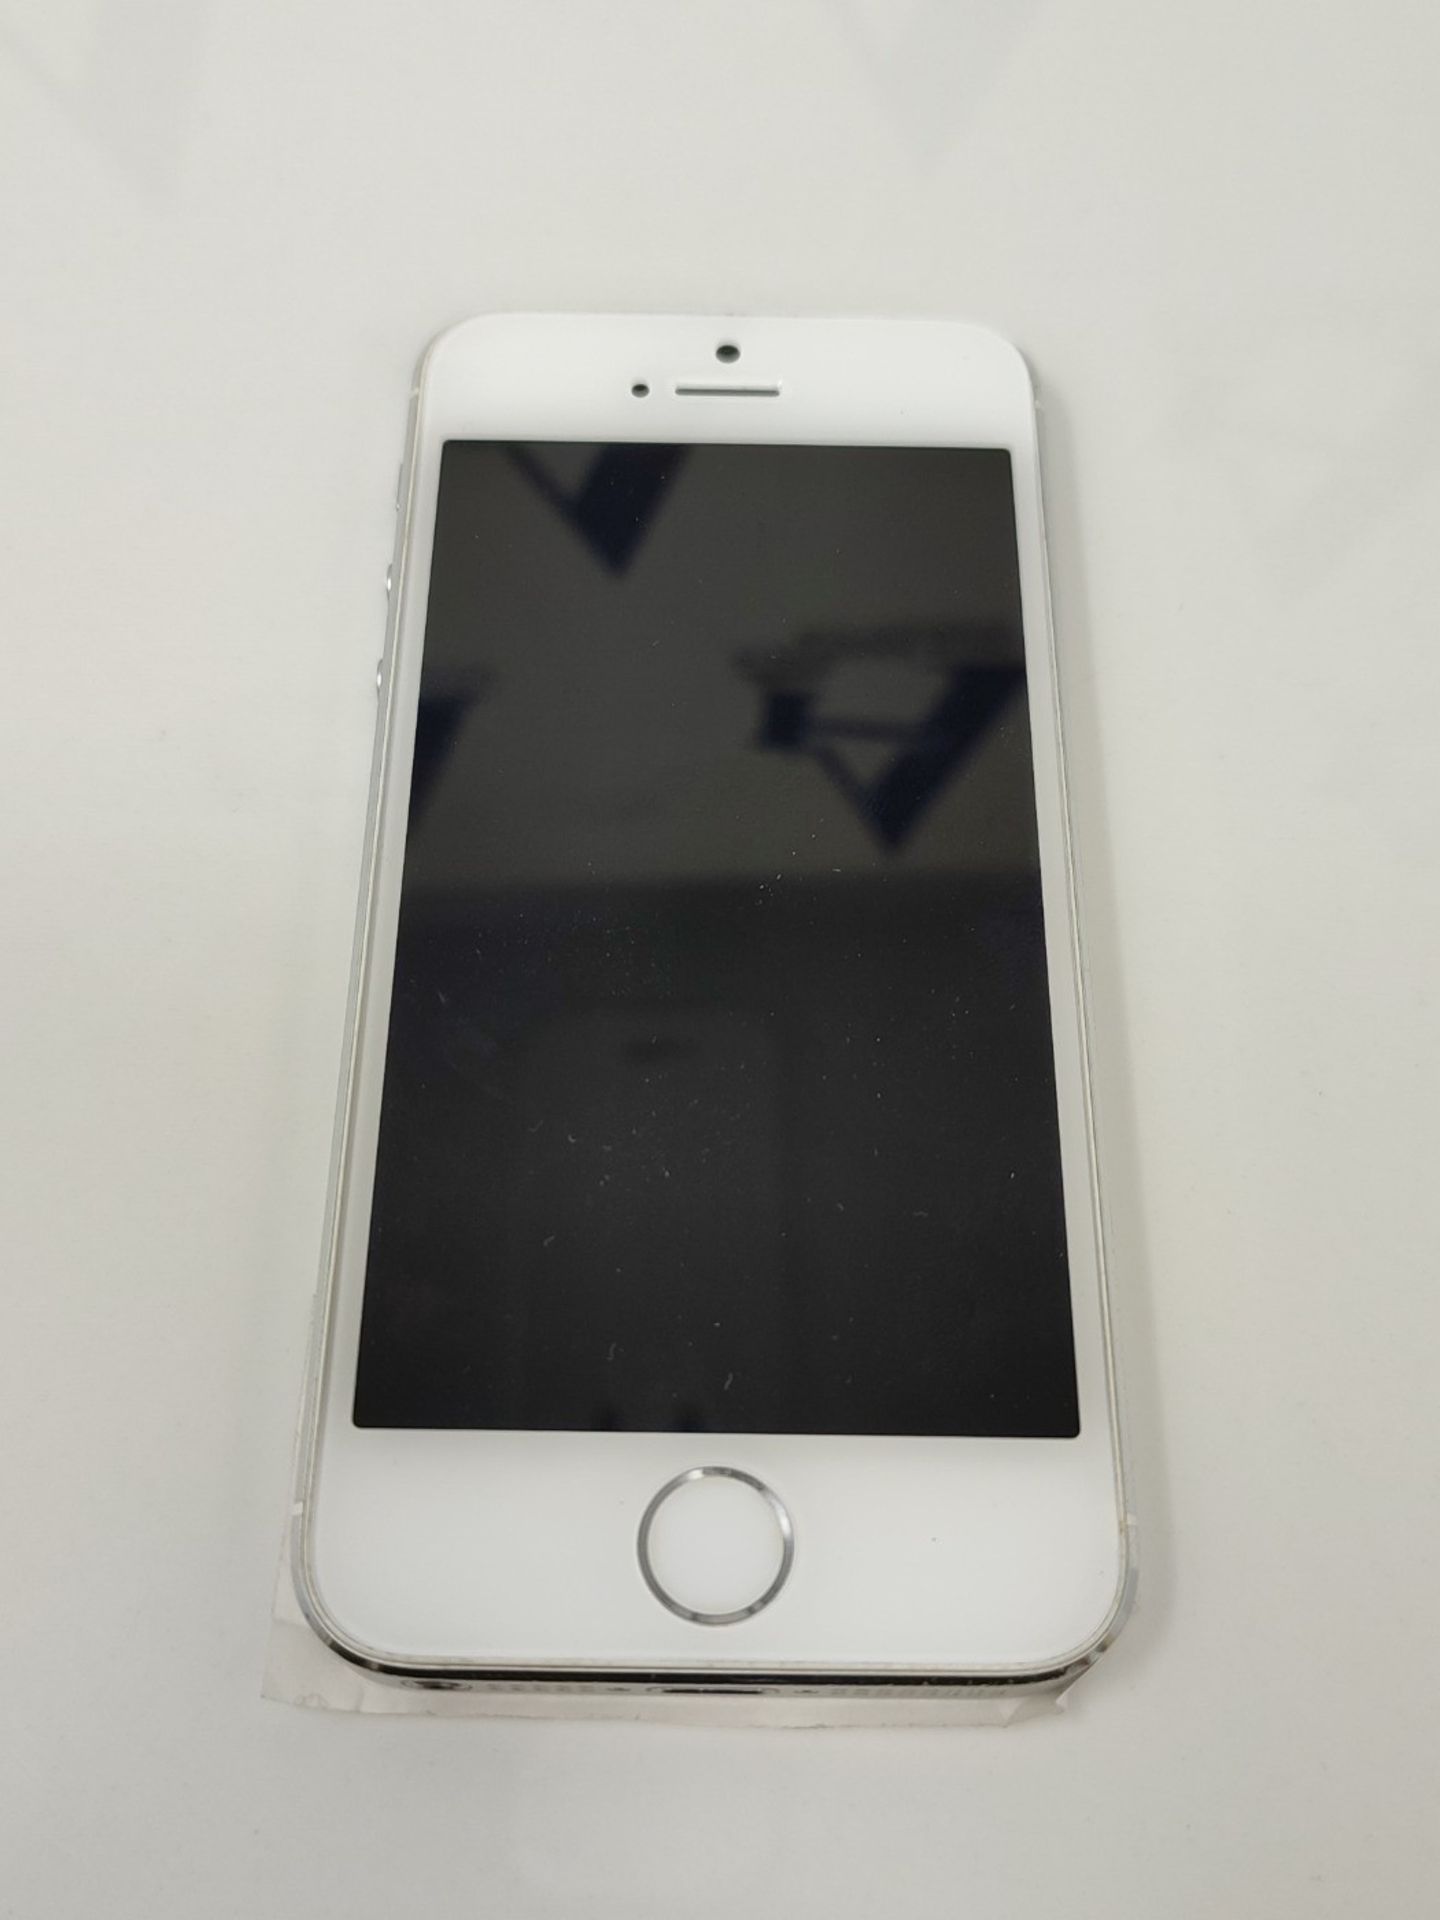 Apple iPhone 5s A1457 16GB White